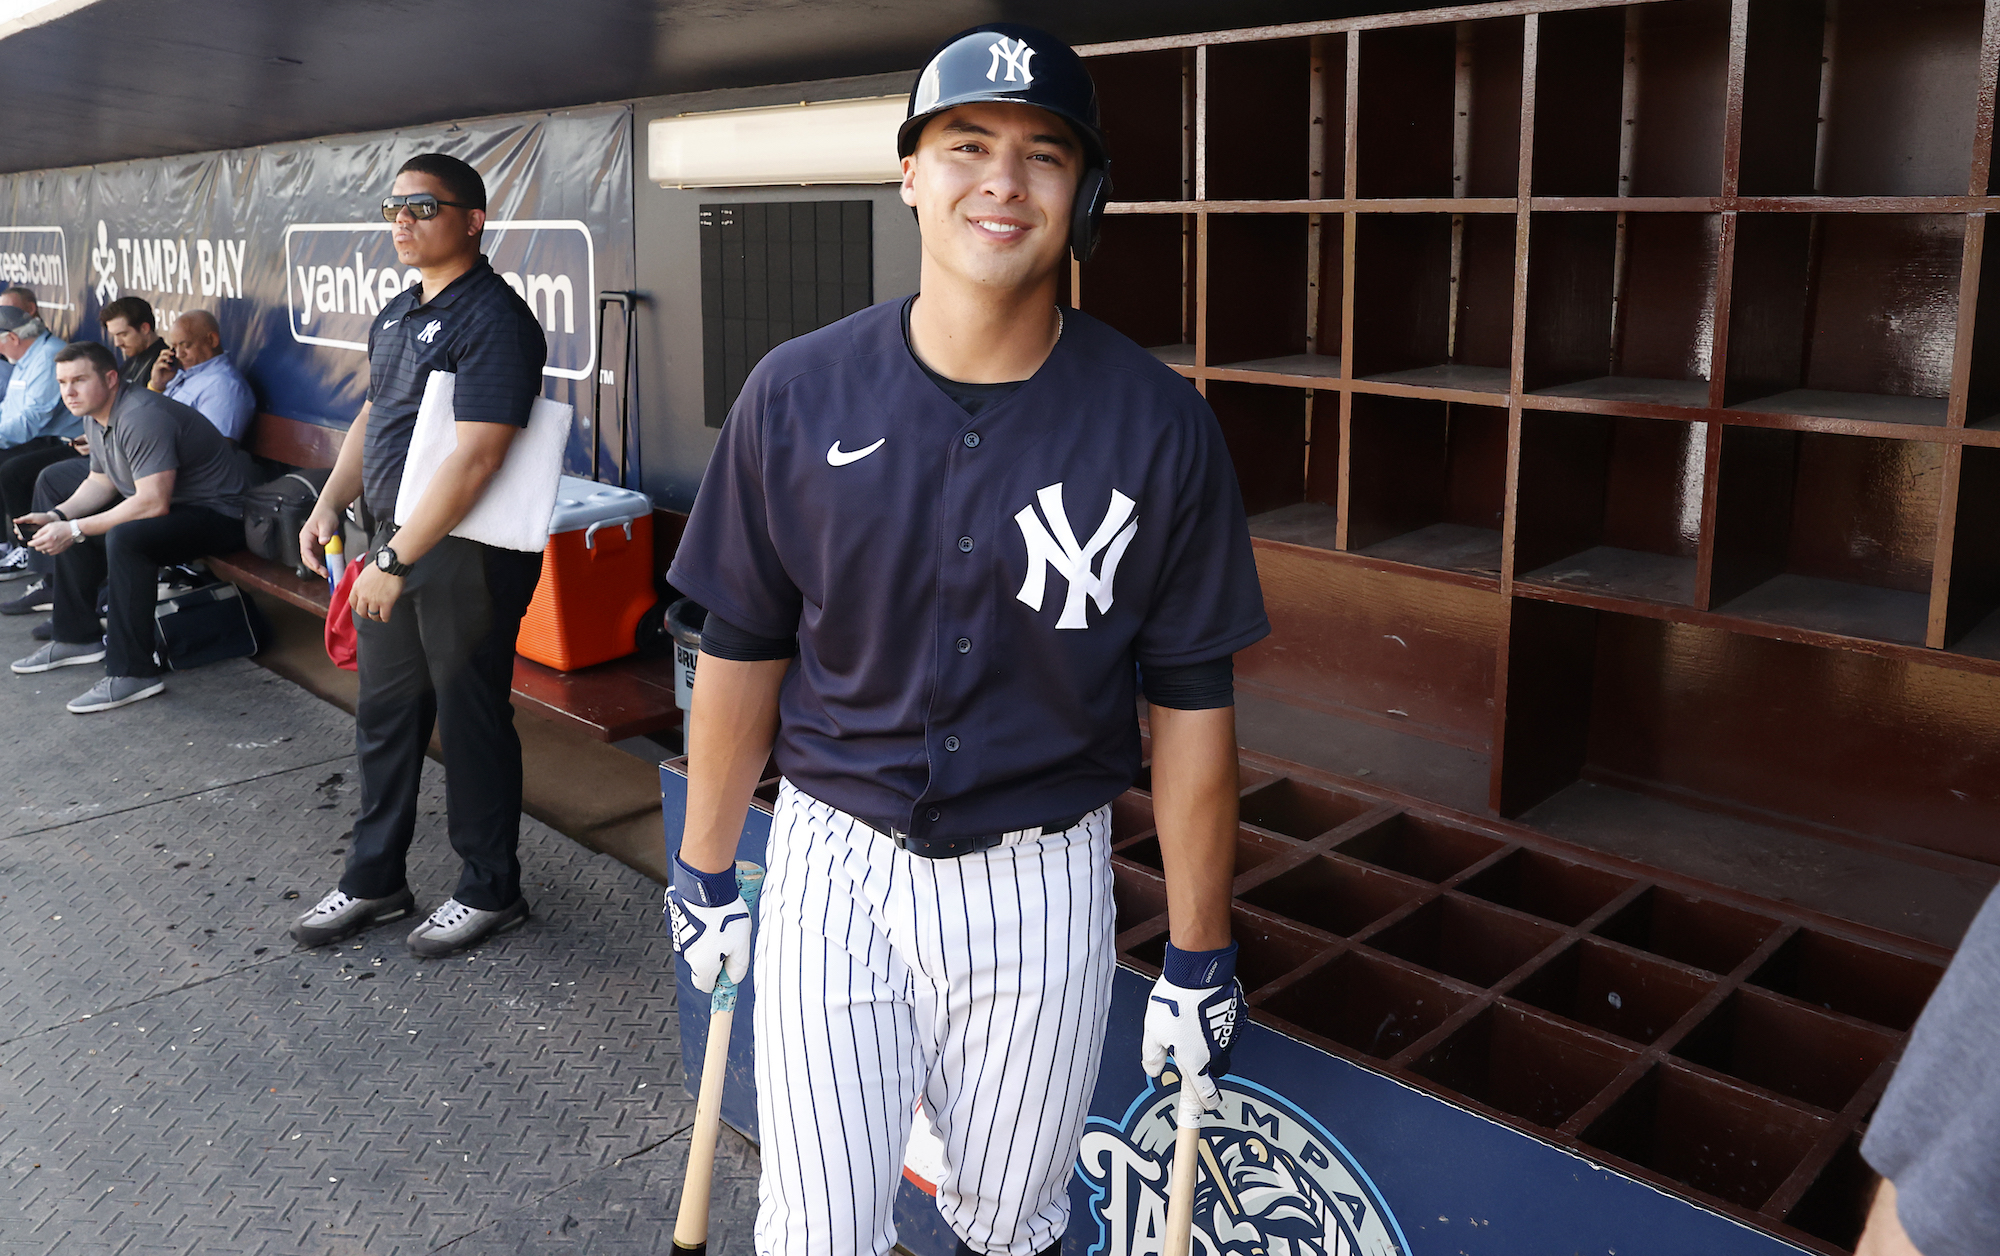 TAMPA, FL - FEBRUARY 23: Anthony Volpe #77 of the New York Yankees smiles during Spring Training at George M. Steinbrenner Field on February 23, 2023 in Tampa, Florida. (Photo by New York Yankees/Getty Images)